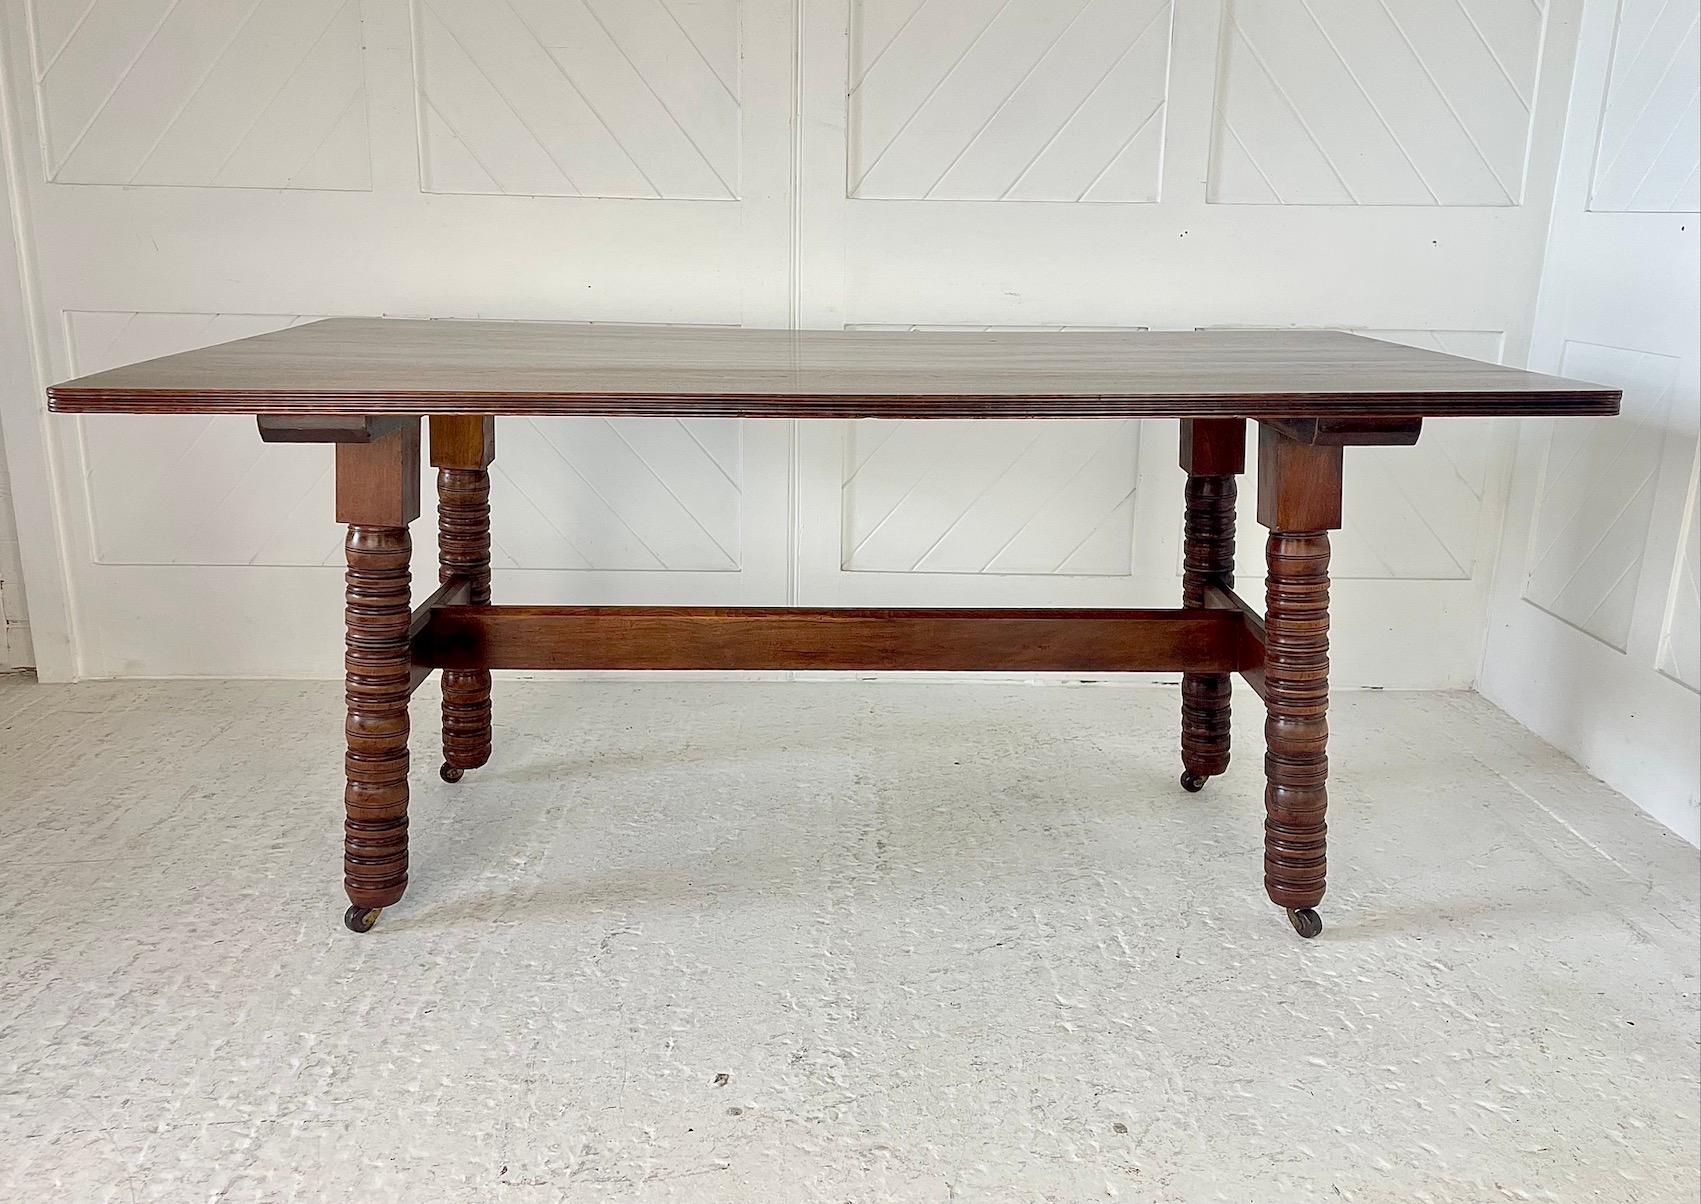 Arts & Crafts rectangular top walnut dining table or work table
Raised on 4 turned supports
Brass and ceramic castors
The legs of this table are splayed and united by a raised ‘H’ stretcher with through tenon detail and chamfered top edge.
Designed